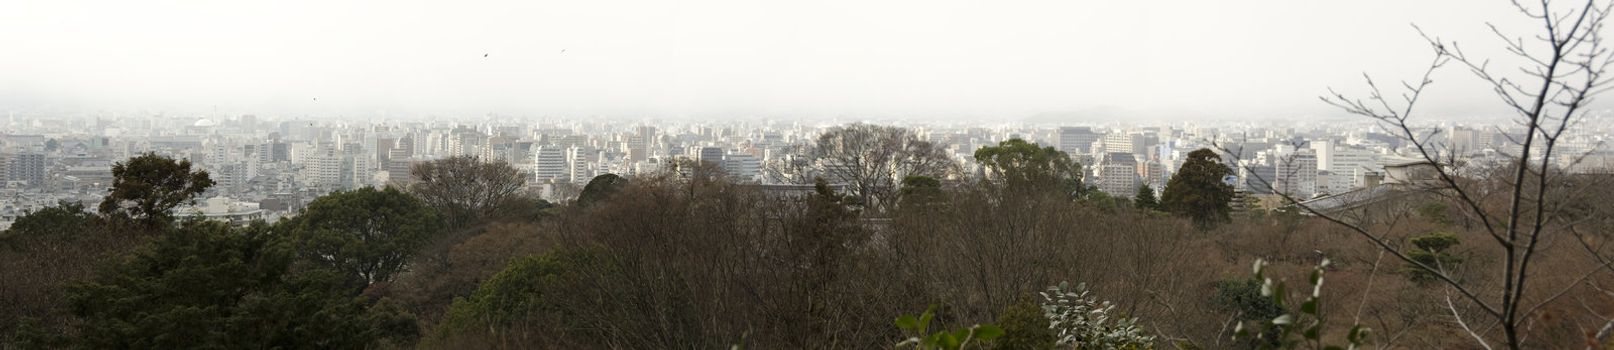 Panorama view of Kyoto with trees in the forground